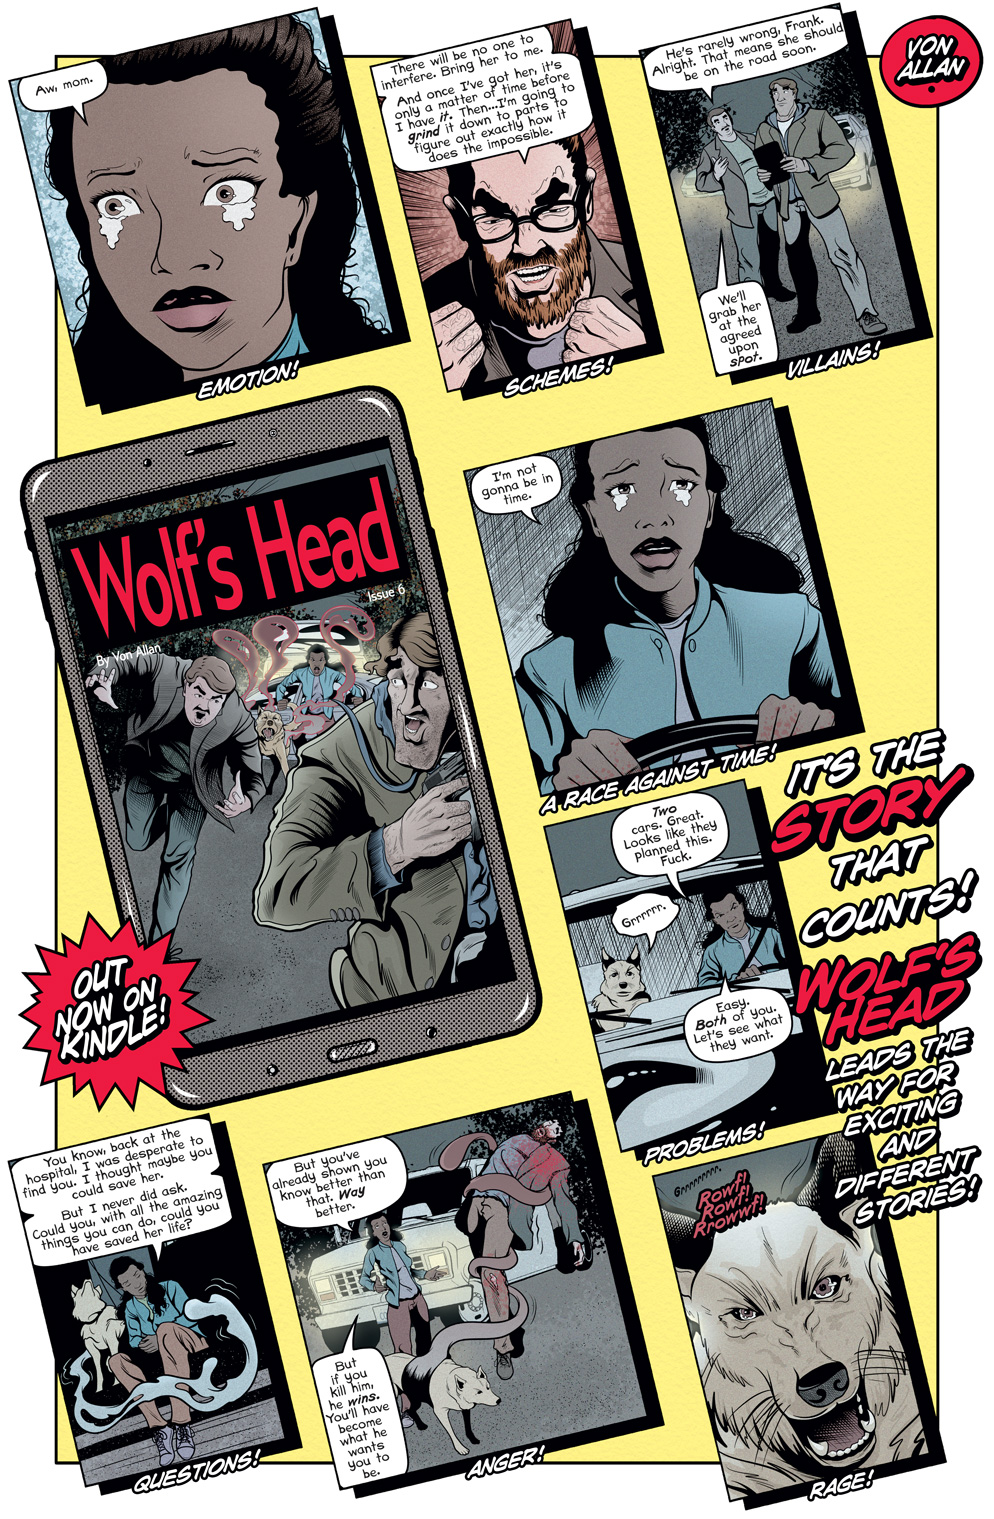 Teaser image for Wolf's Head issue 6 on Kindle